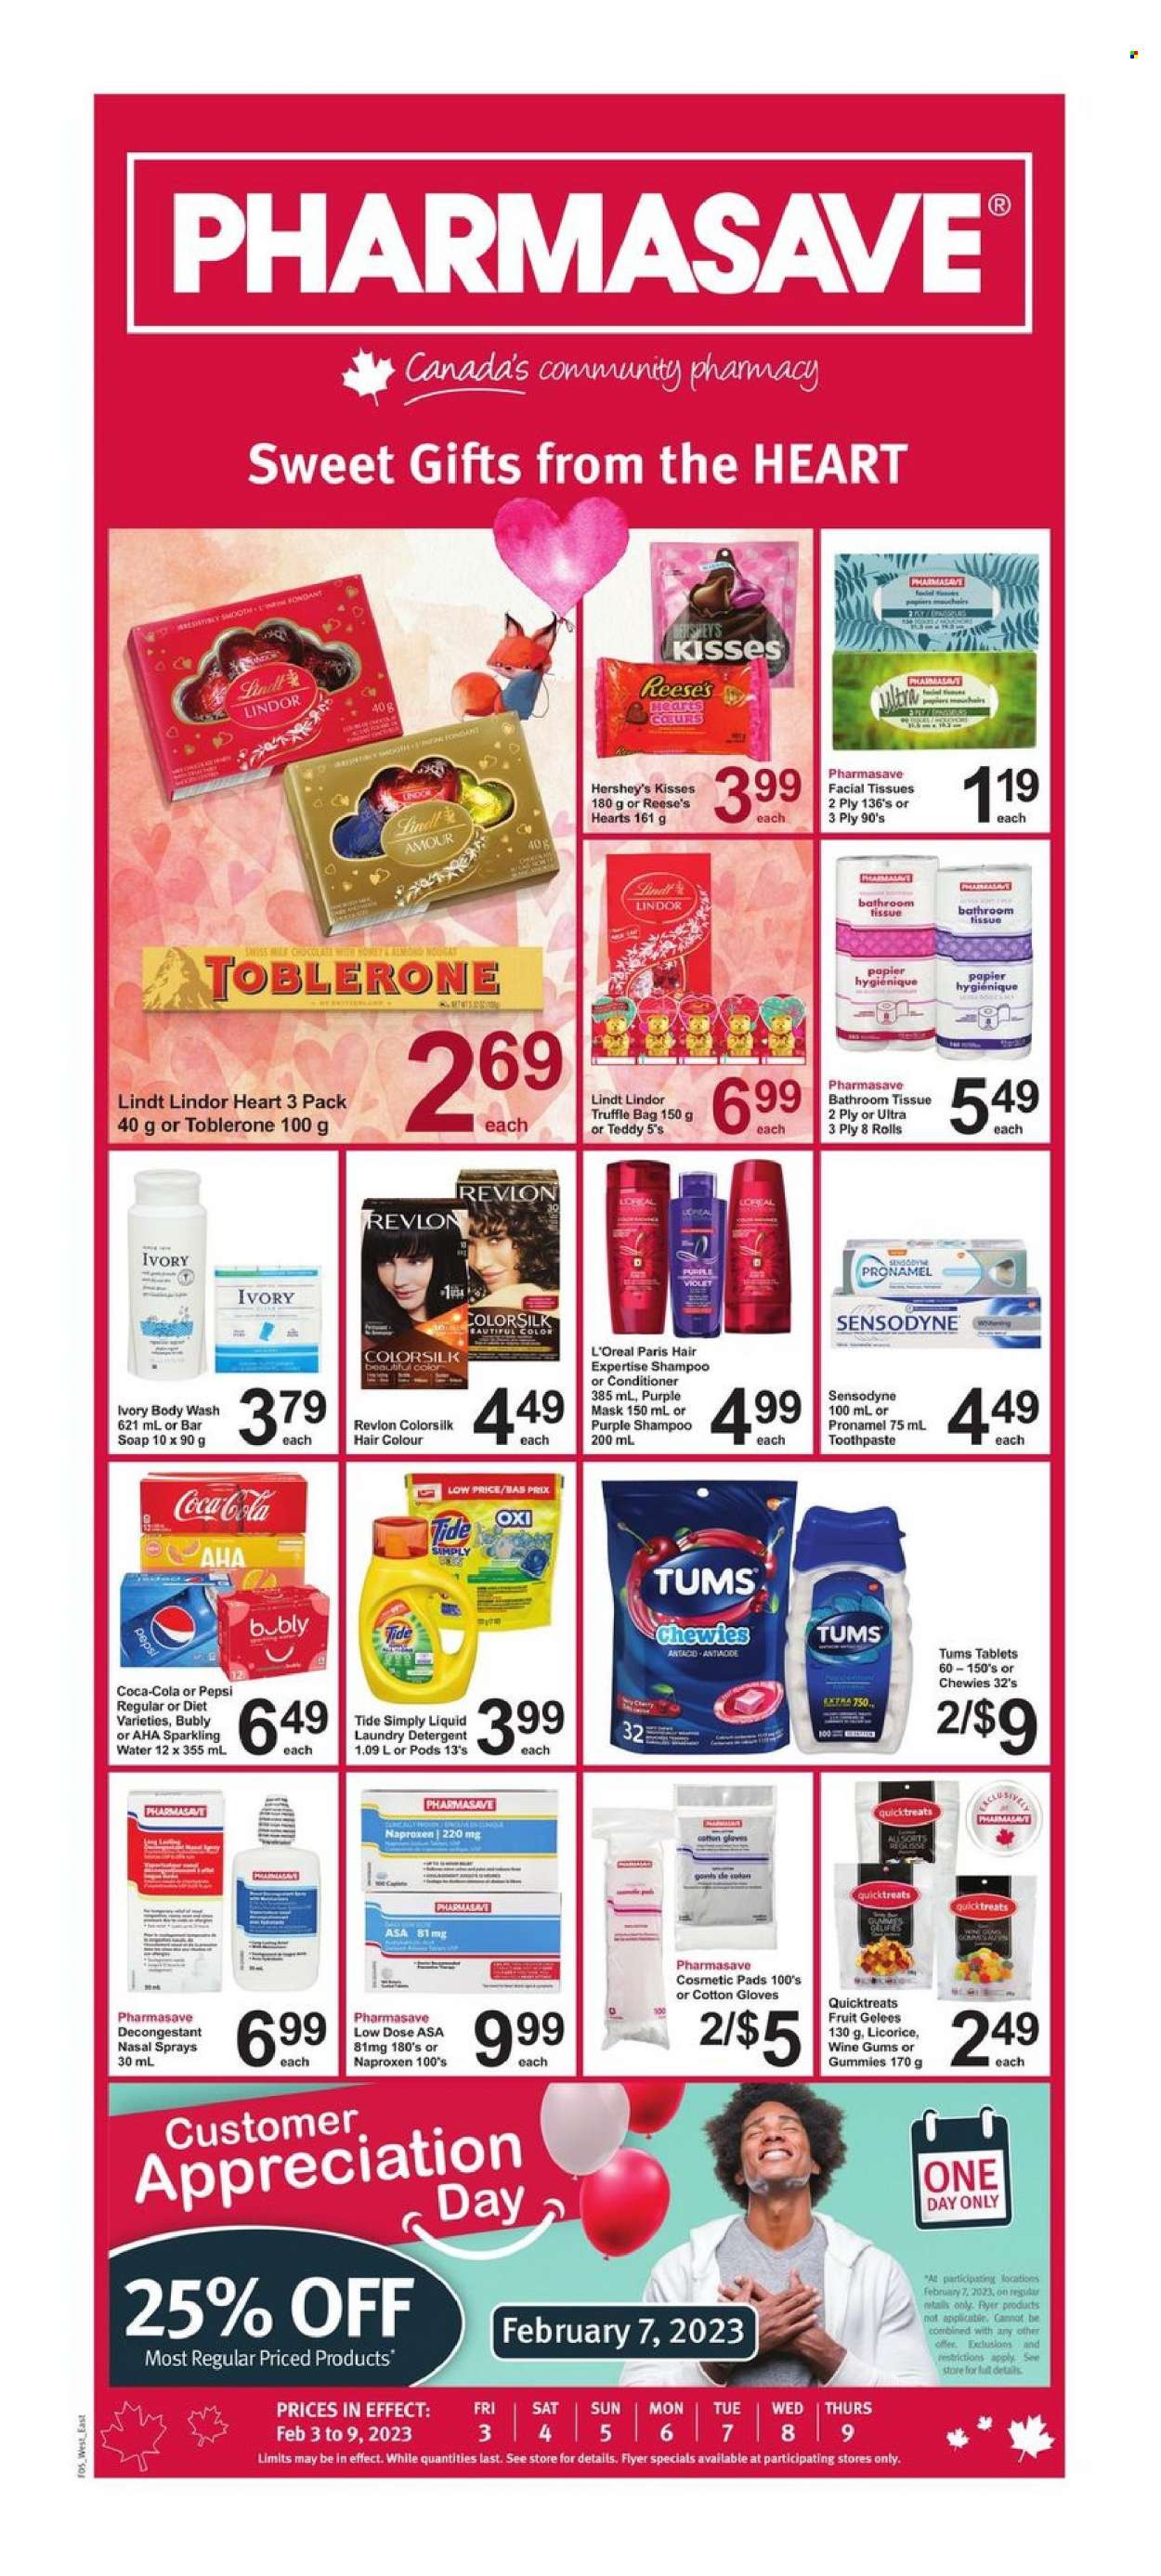 thumbnail - Pharmasave Flyer - February 03, 2023 - February 09, 2023 - Sales products - cherries, Reese's, Hershey's, chocolate, truffles, Toblerone, Coca-Cola, Pepsi, sparkling water, bath tissue, Tide, laundry detergent, body wash, soap bar, soap, toothpaste, facial tissues, L’Oréal, conditioner, Revlon, hair color, bag, gloves, teddy, Low Dose, detergent, shampoo, Sensodyne, Lindt, Lindor, nougat. Page 1.